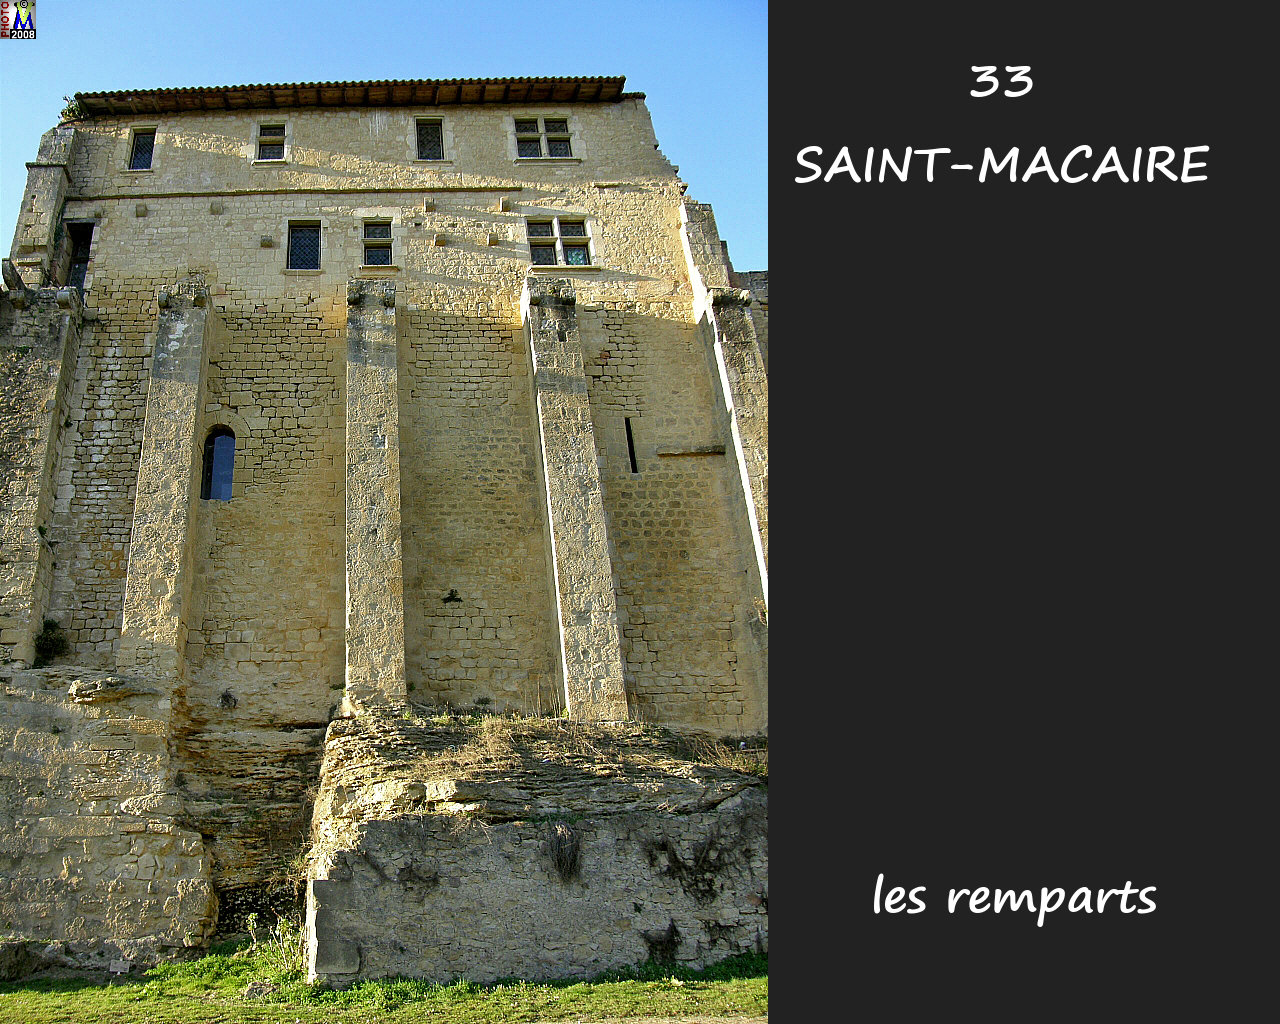 33StMACAIRE_remparts_104.jpg